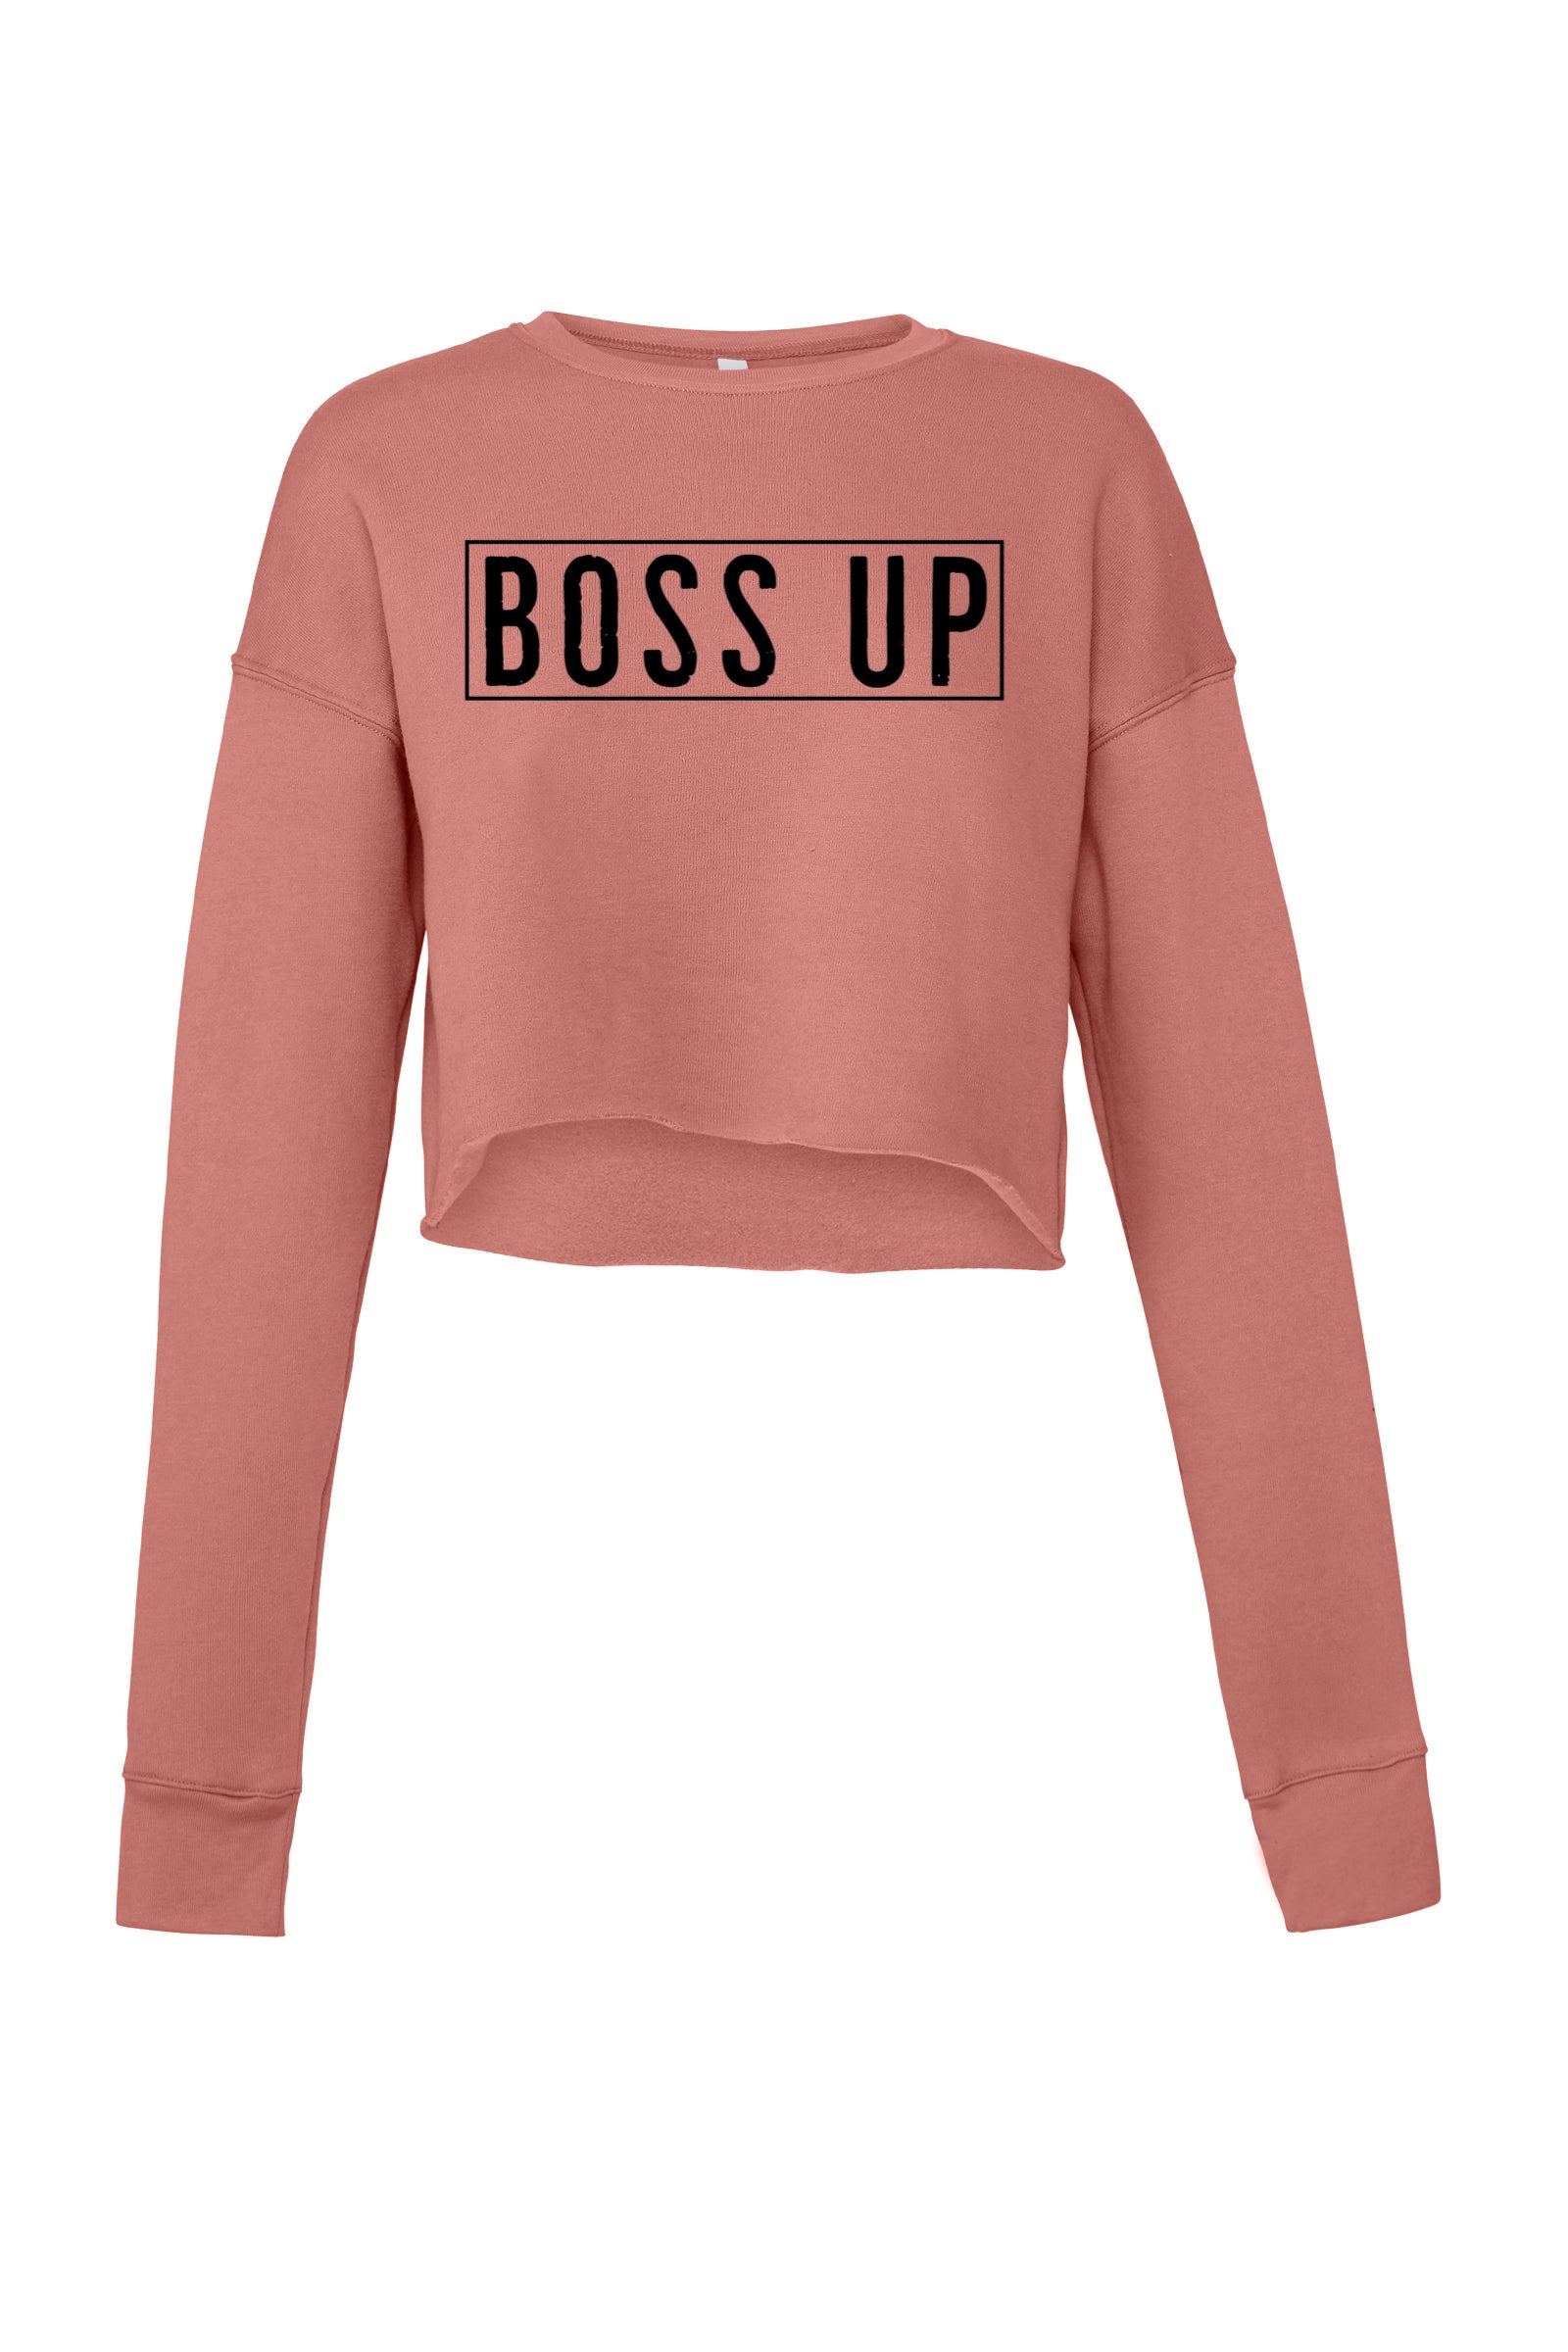 BOSS UP GLASS CAN (LID & STRAW INCLUDED) - Fitsweatlife